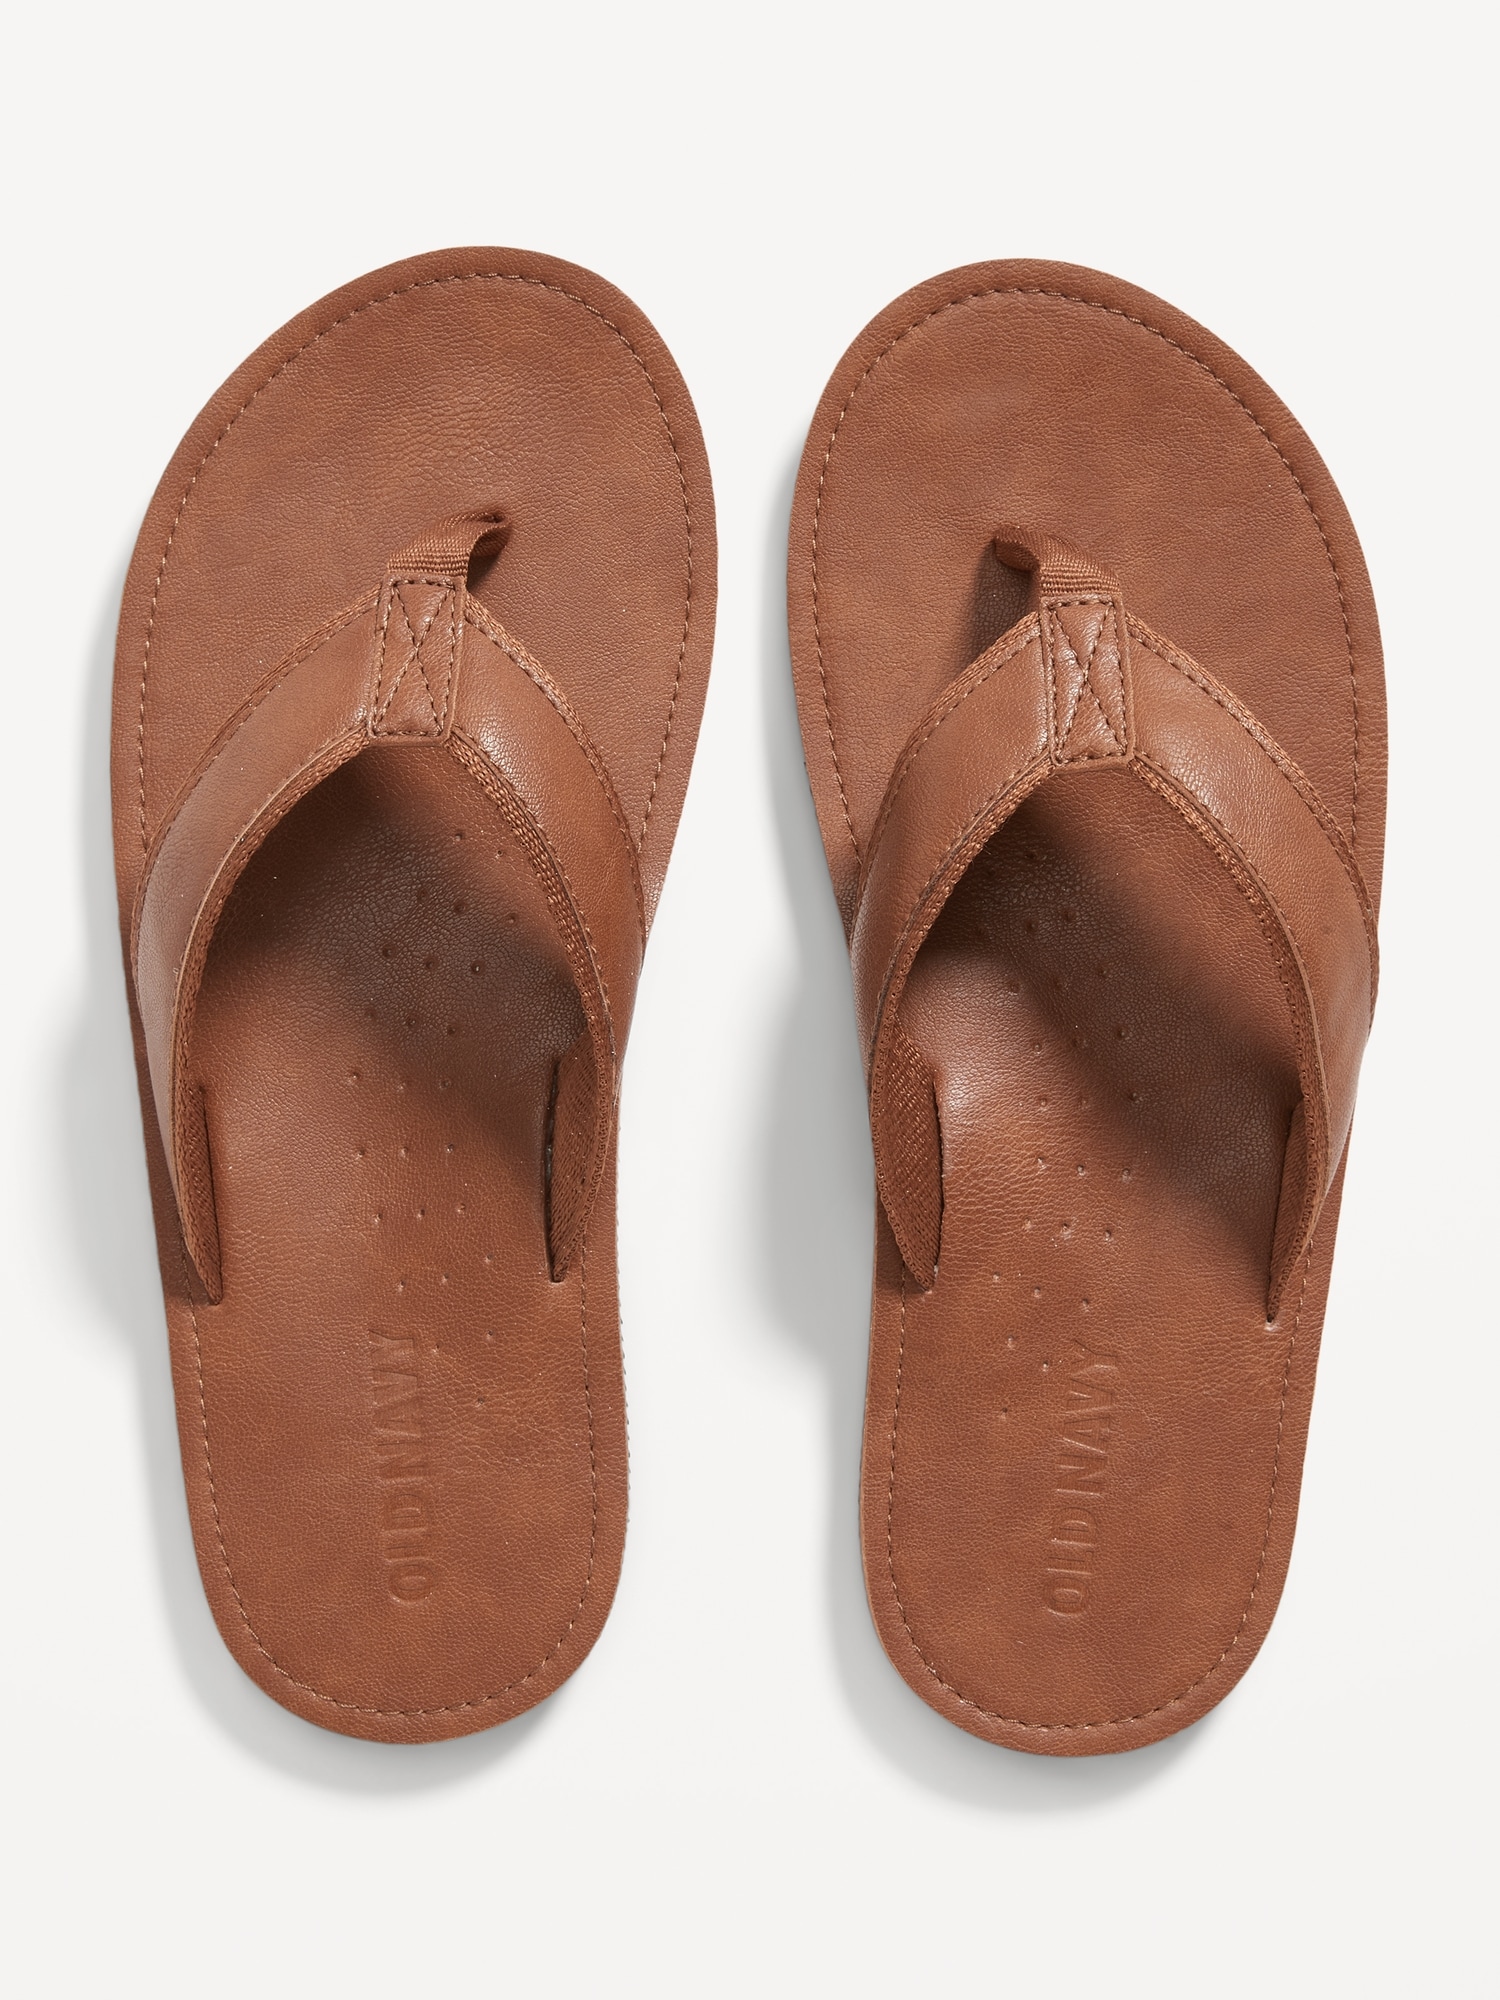 Old Navy Men's Faux-Leather Flip-Flop Sandals (various sizes in tan)